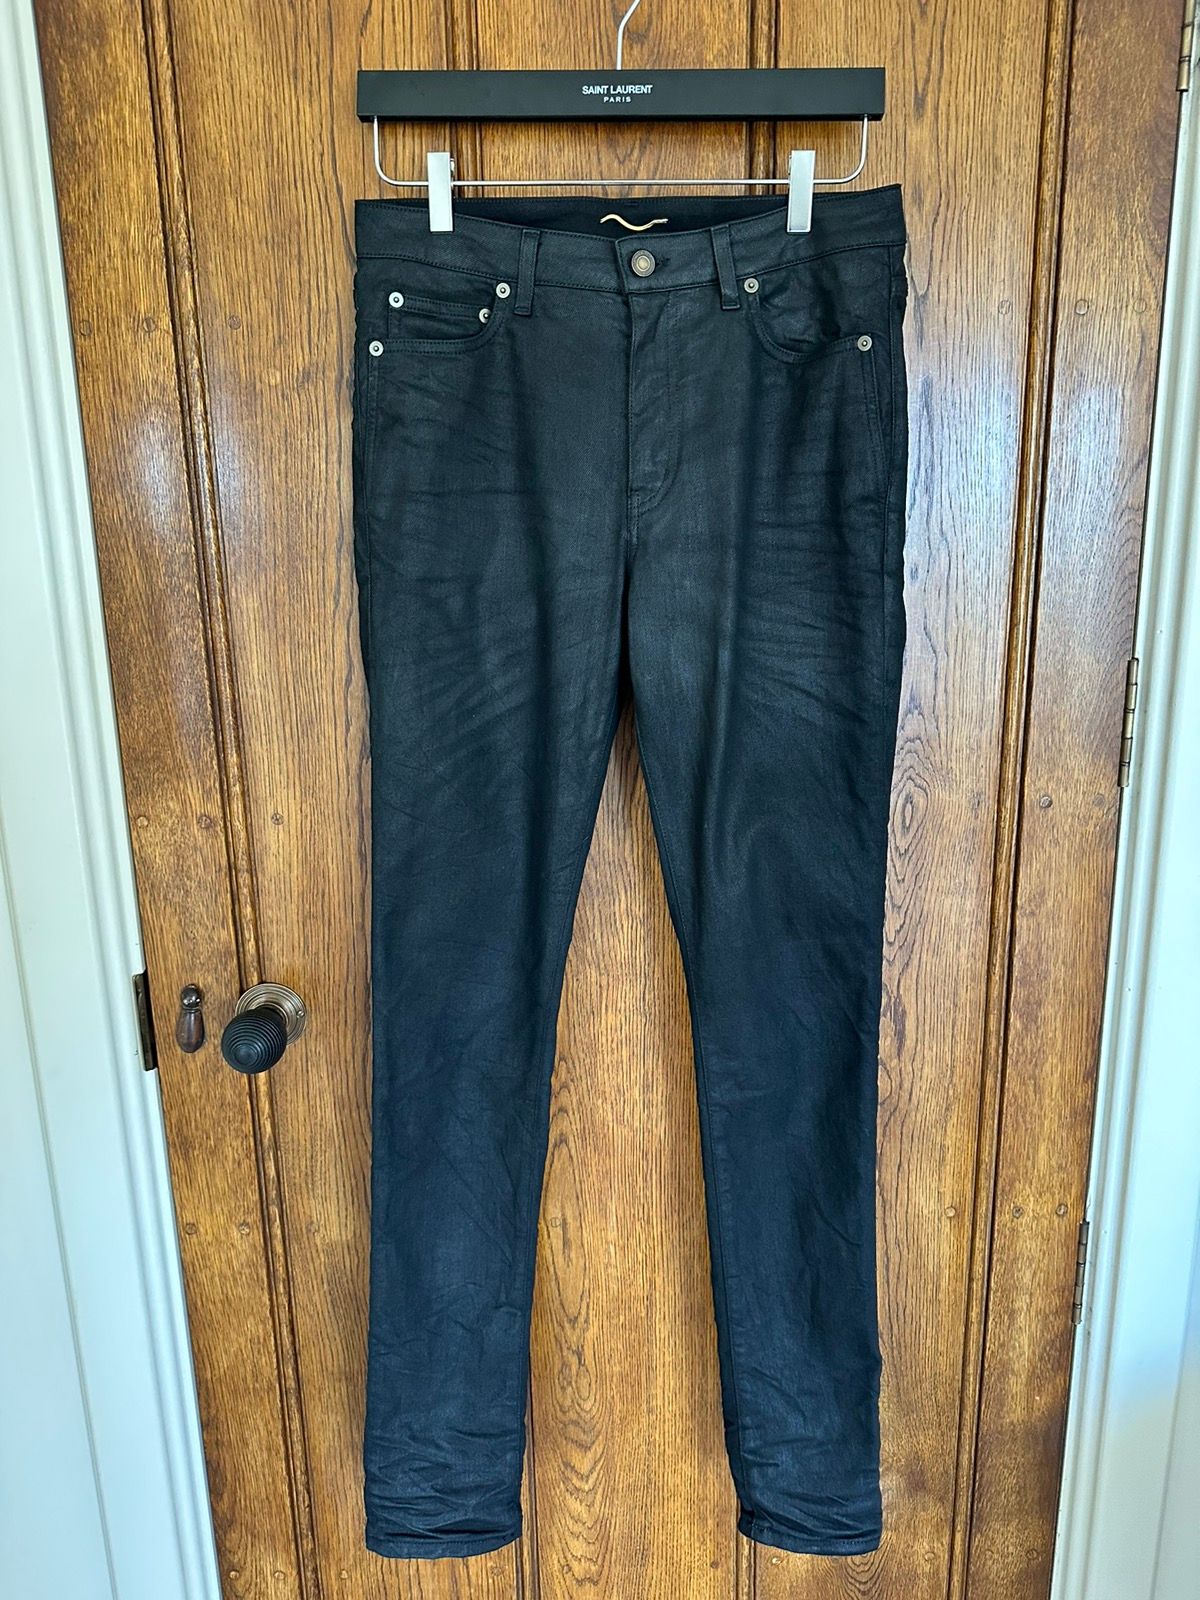 Pre-owned Saint Laurent Black Wax Waxed Jeans 31